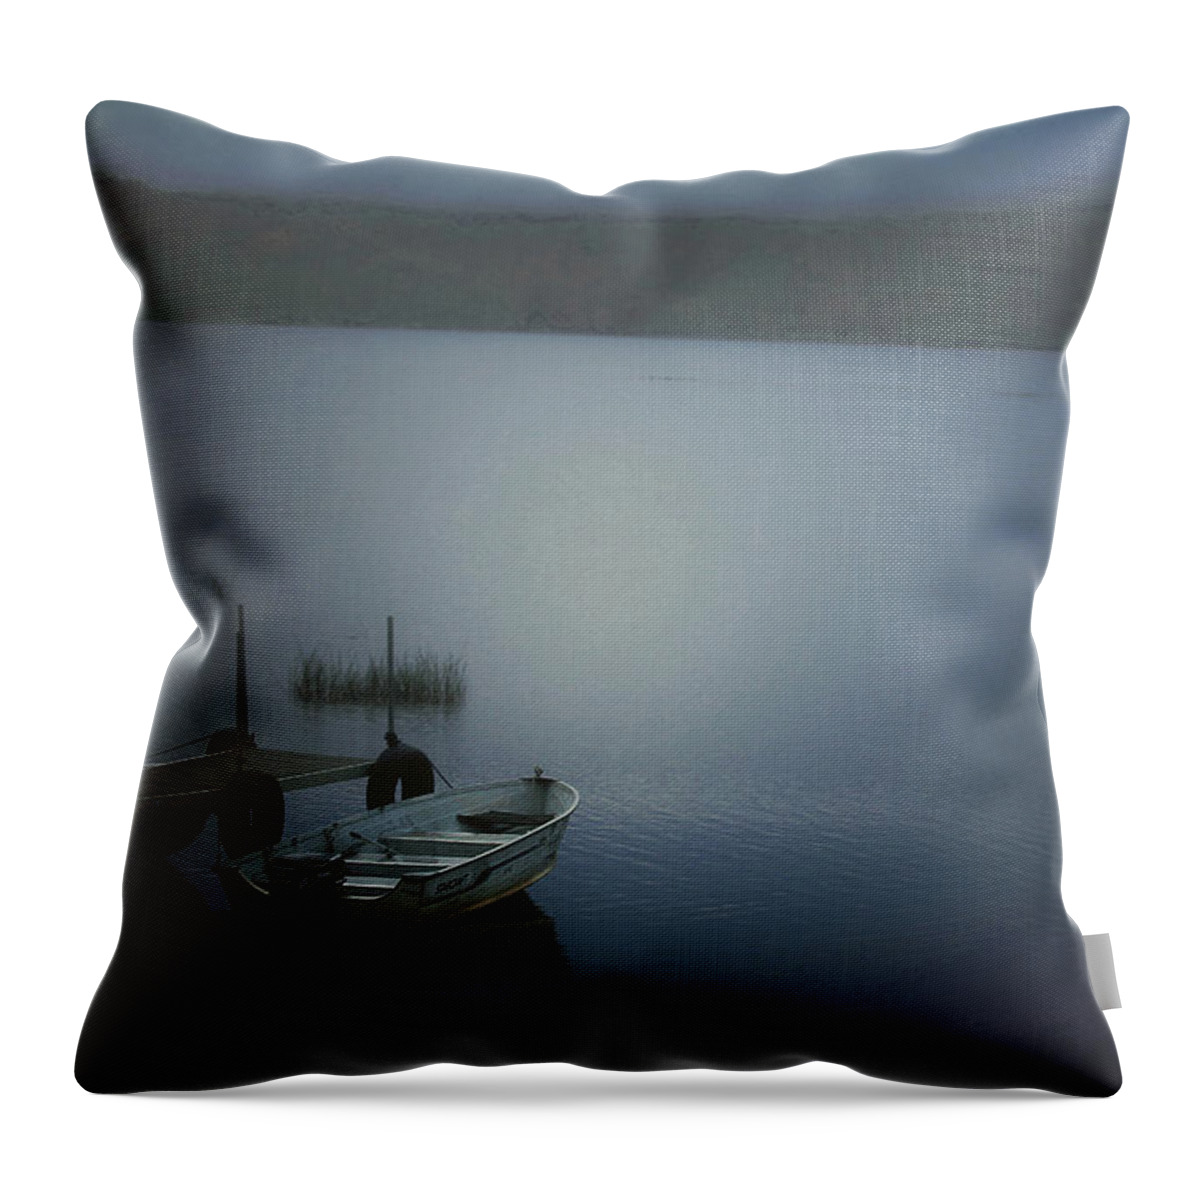 Fall Throw Pillow featuring the photograph The Boat by Carrie Ann Grippo-Pike